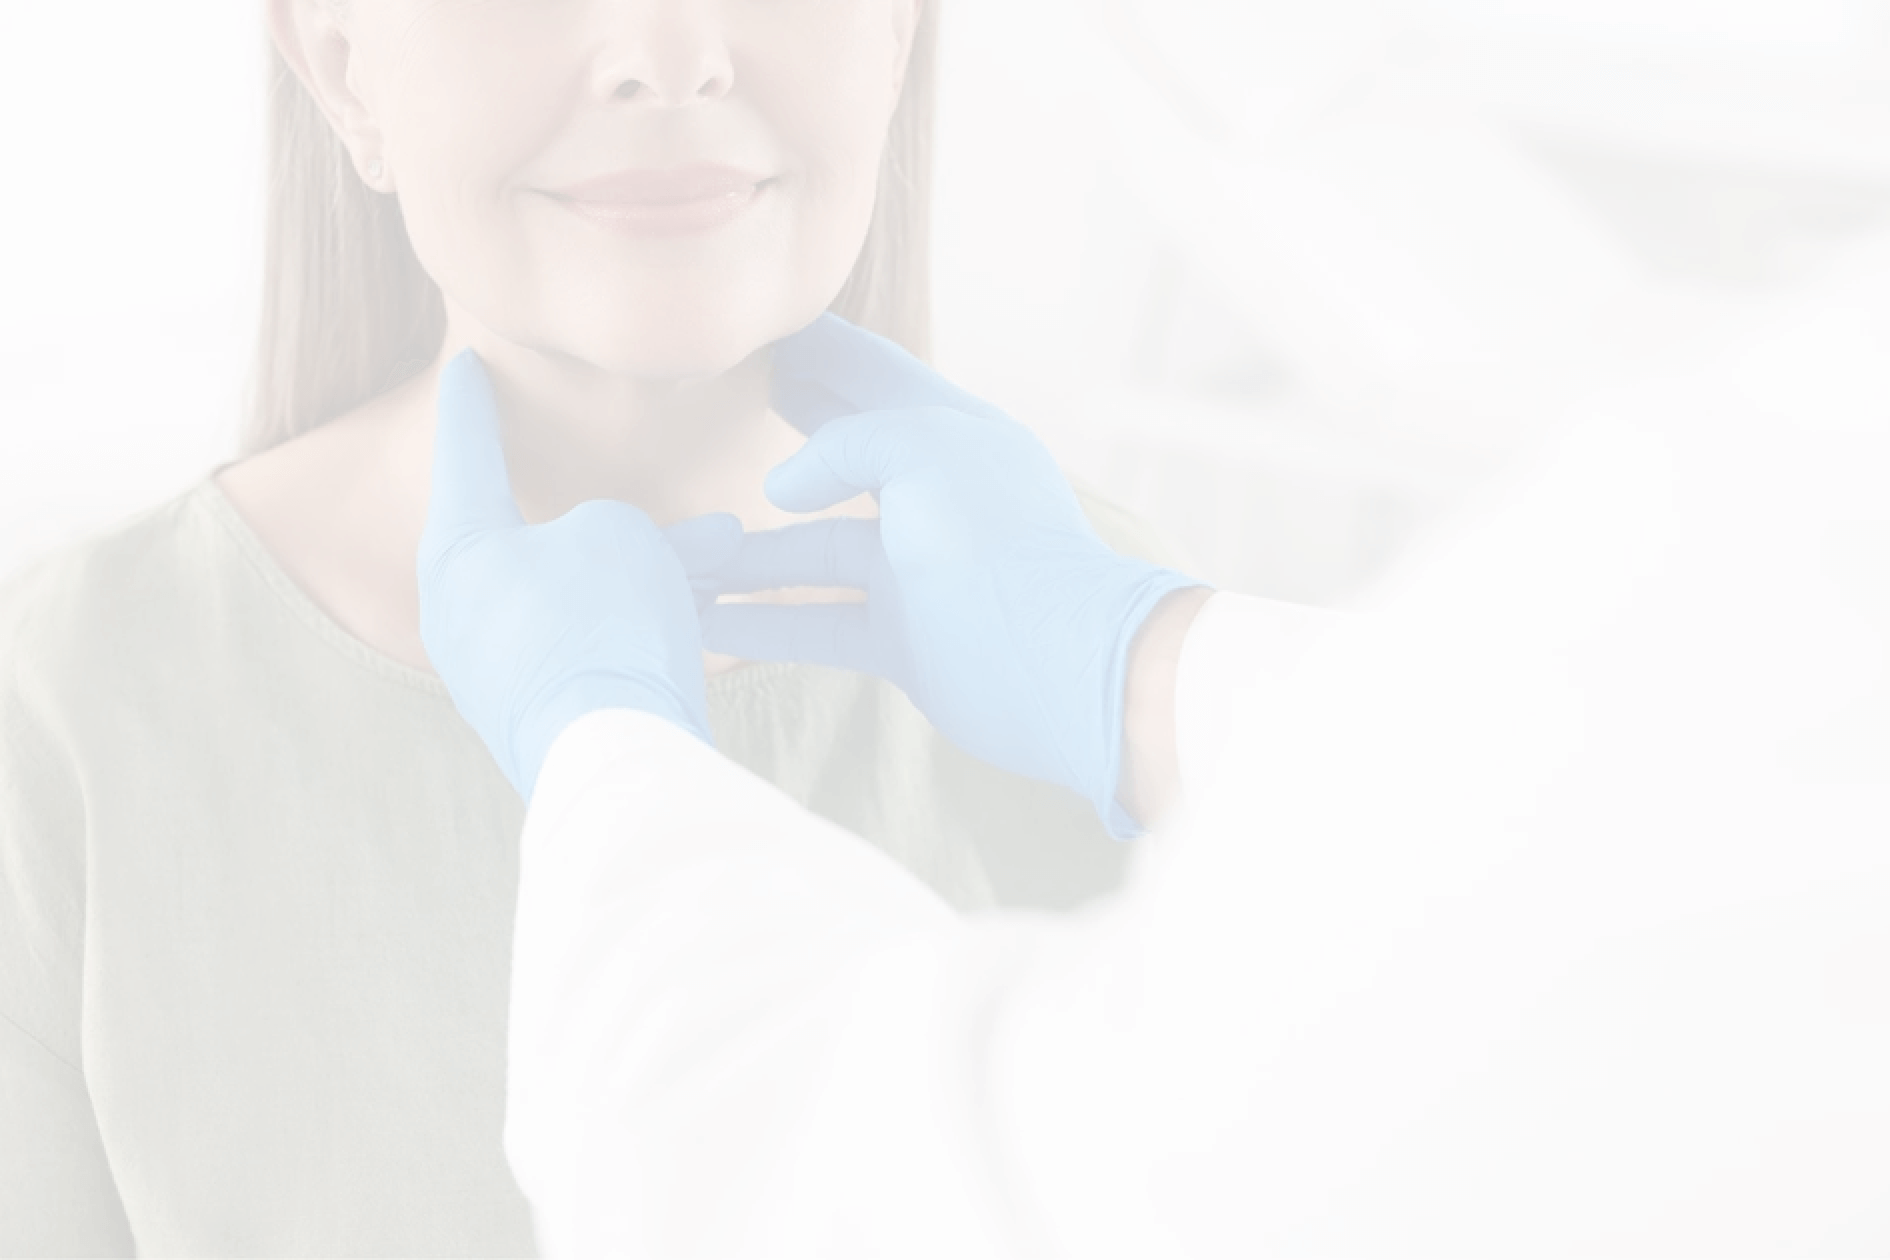 Gloved hands of doctor examining woman's throat